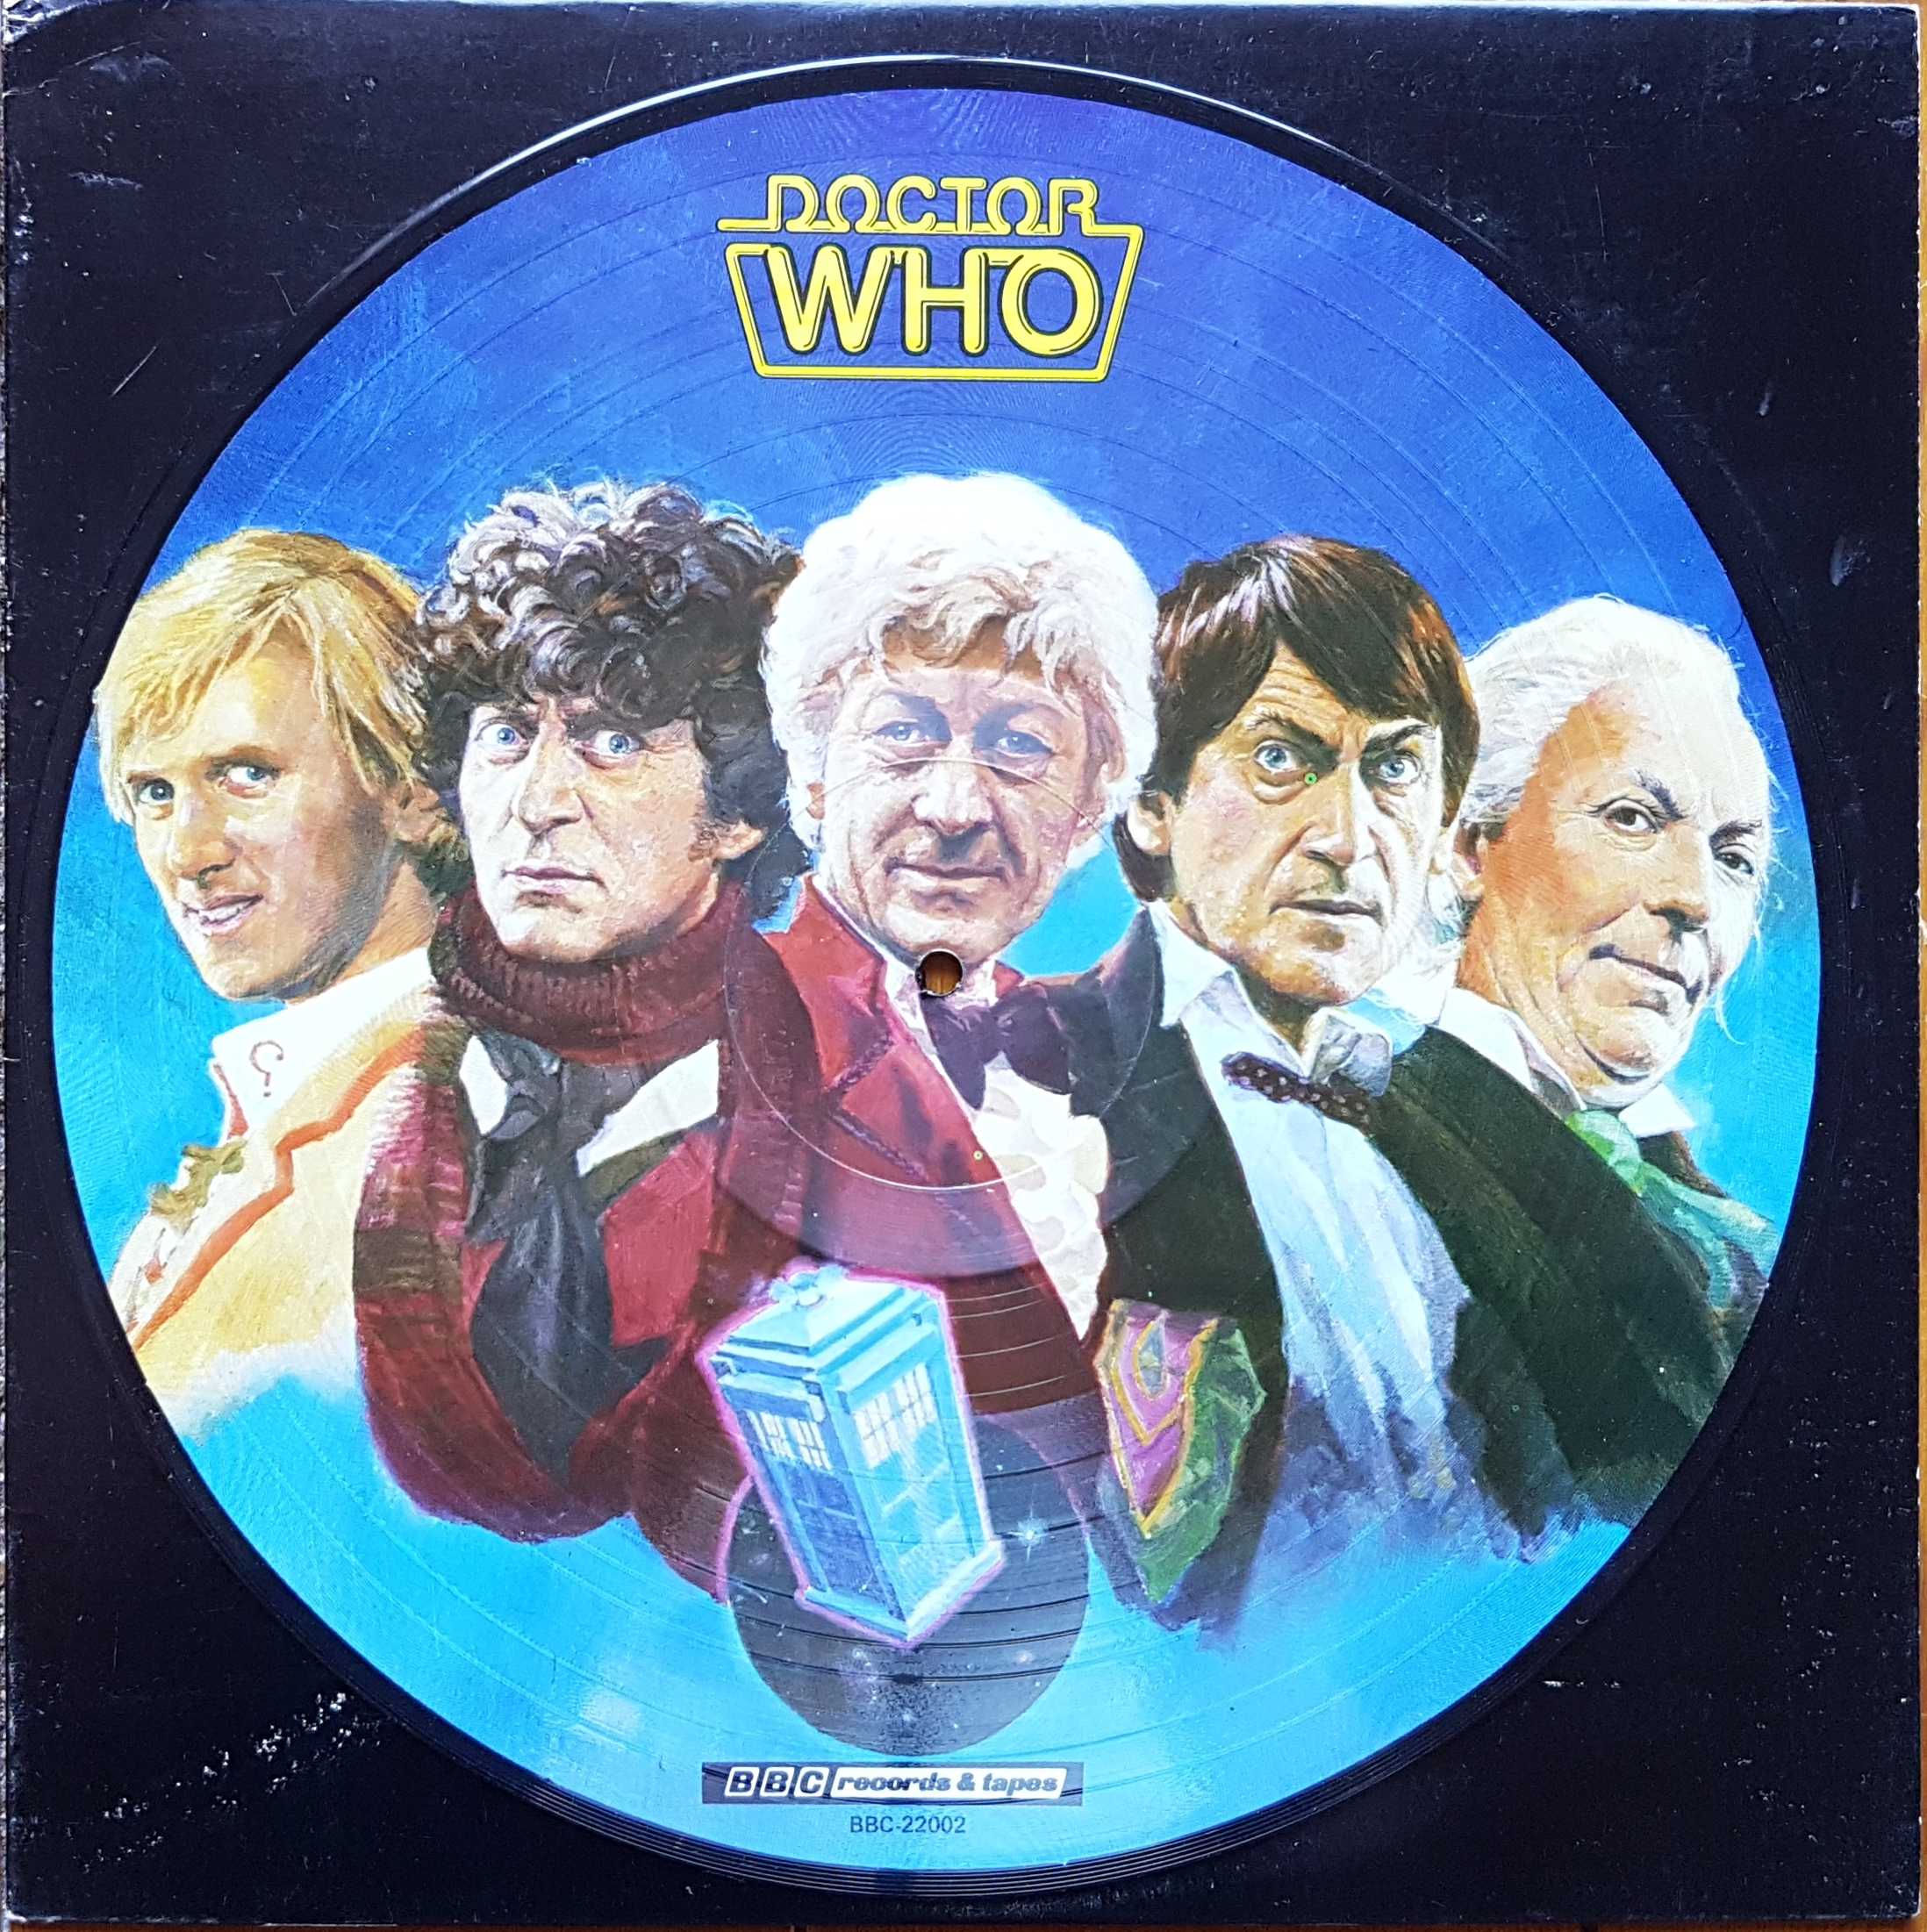 Picture of BBC - 22002 Doctor Who the music by artist Various from the BBC albums - Records and Tapes library